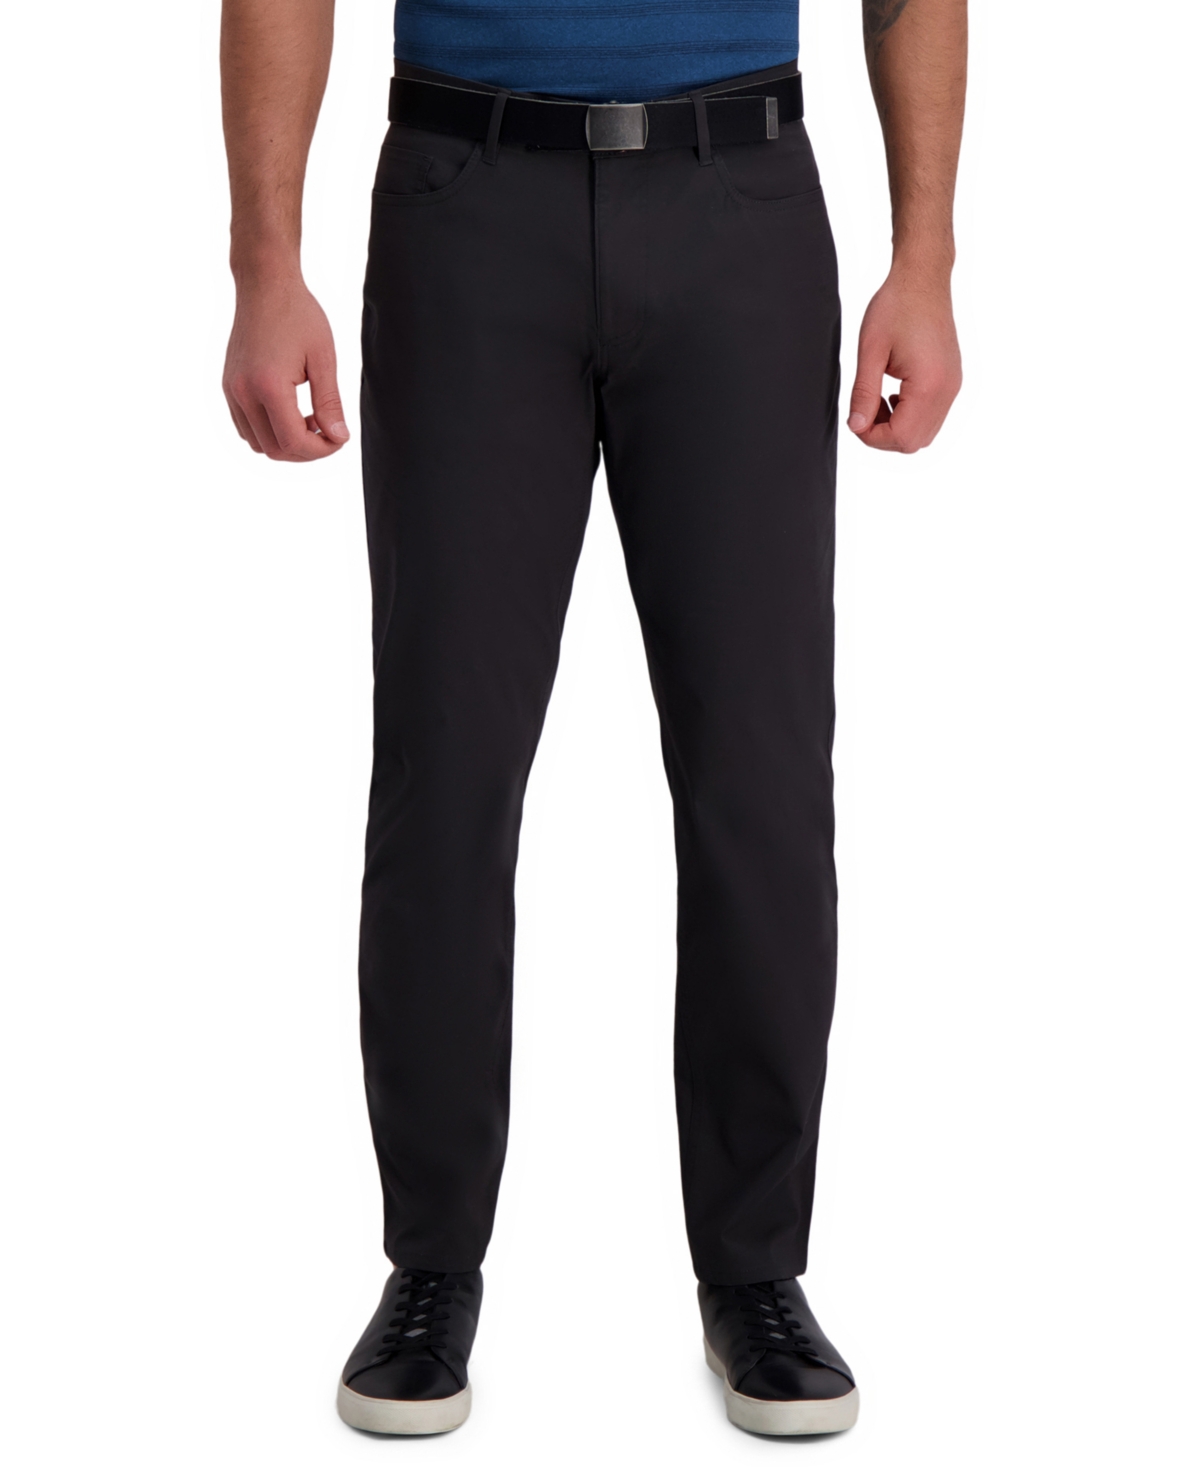 The Active Series City Flex Traveler Slim Fit Flat Front 5-Pocket Casual Pant (Ripstop) - Lead